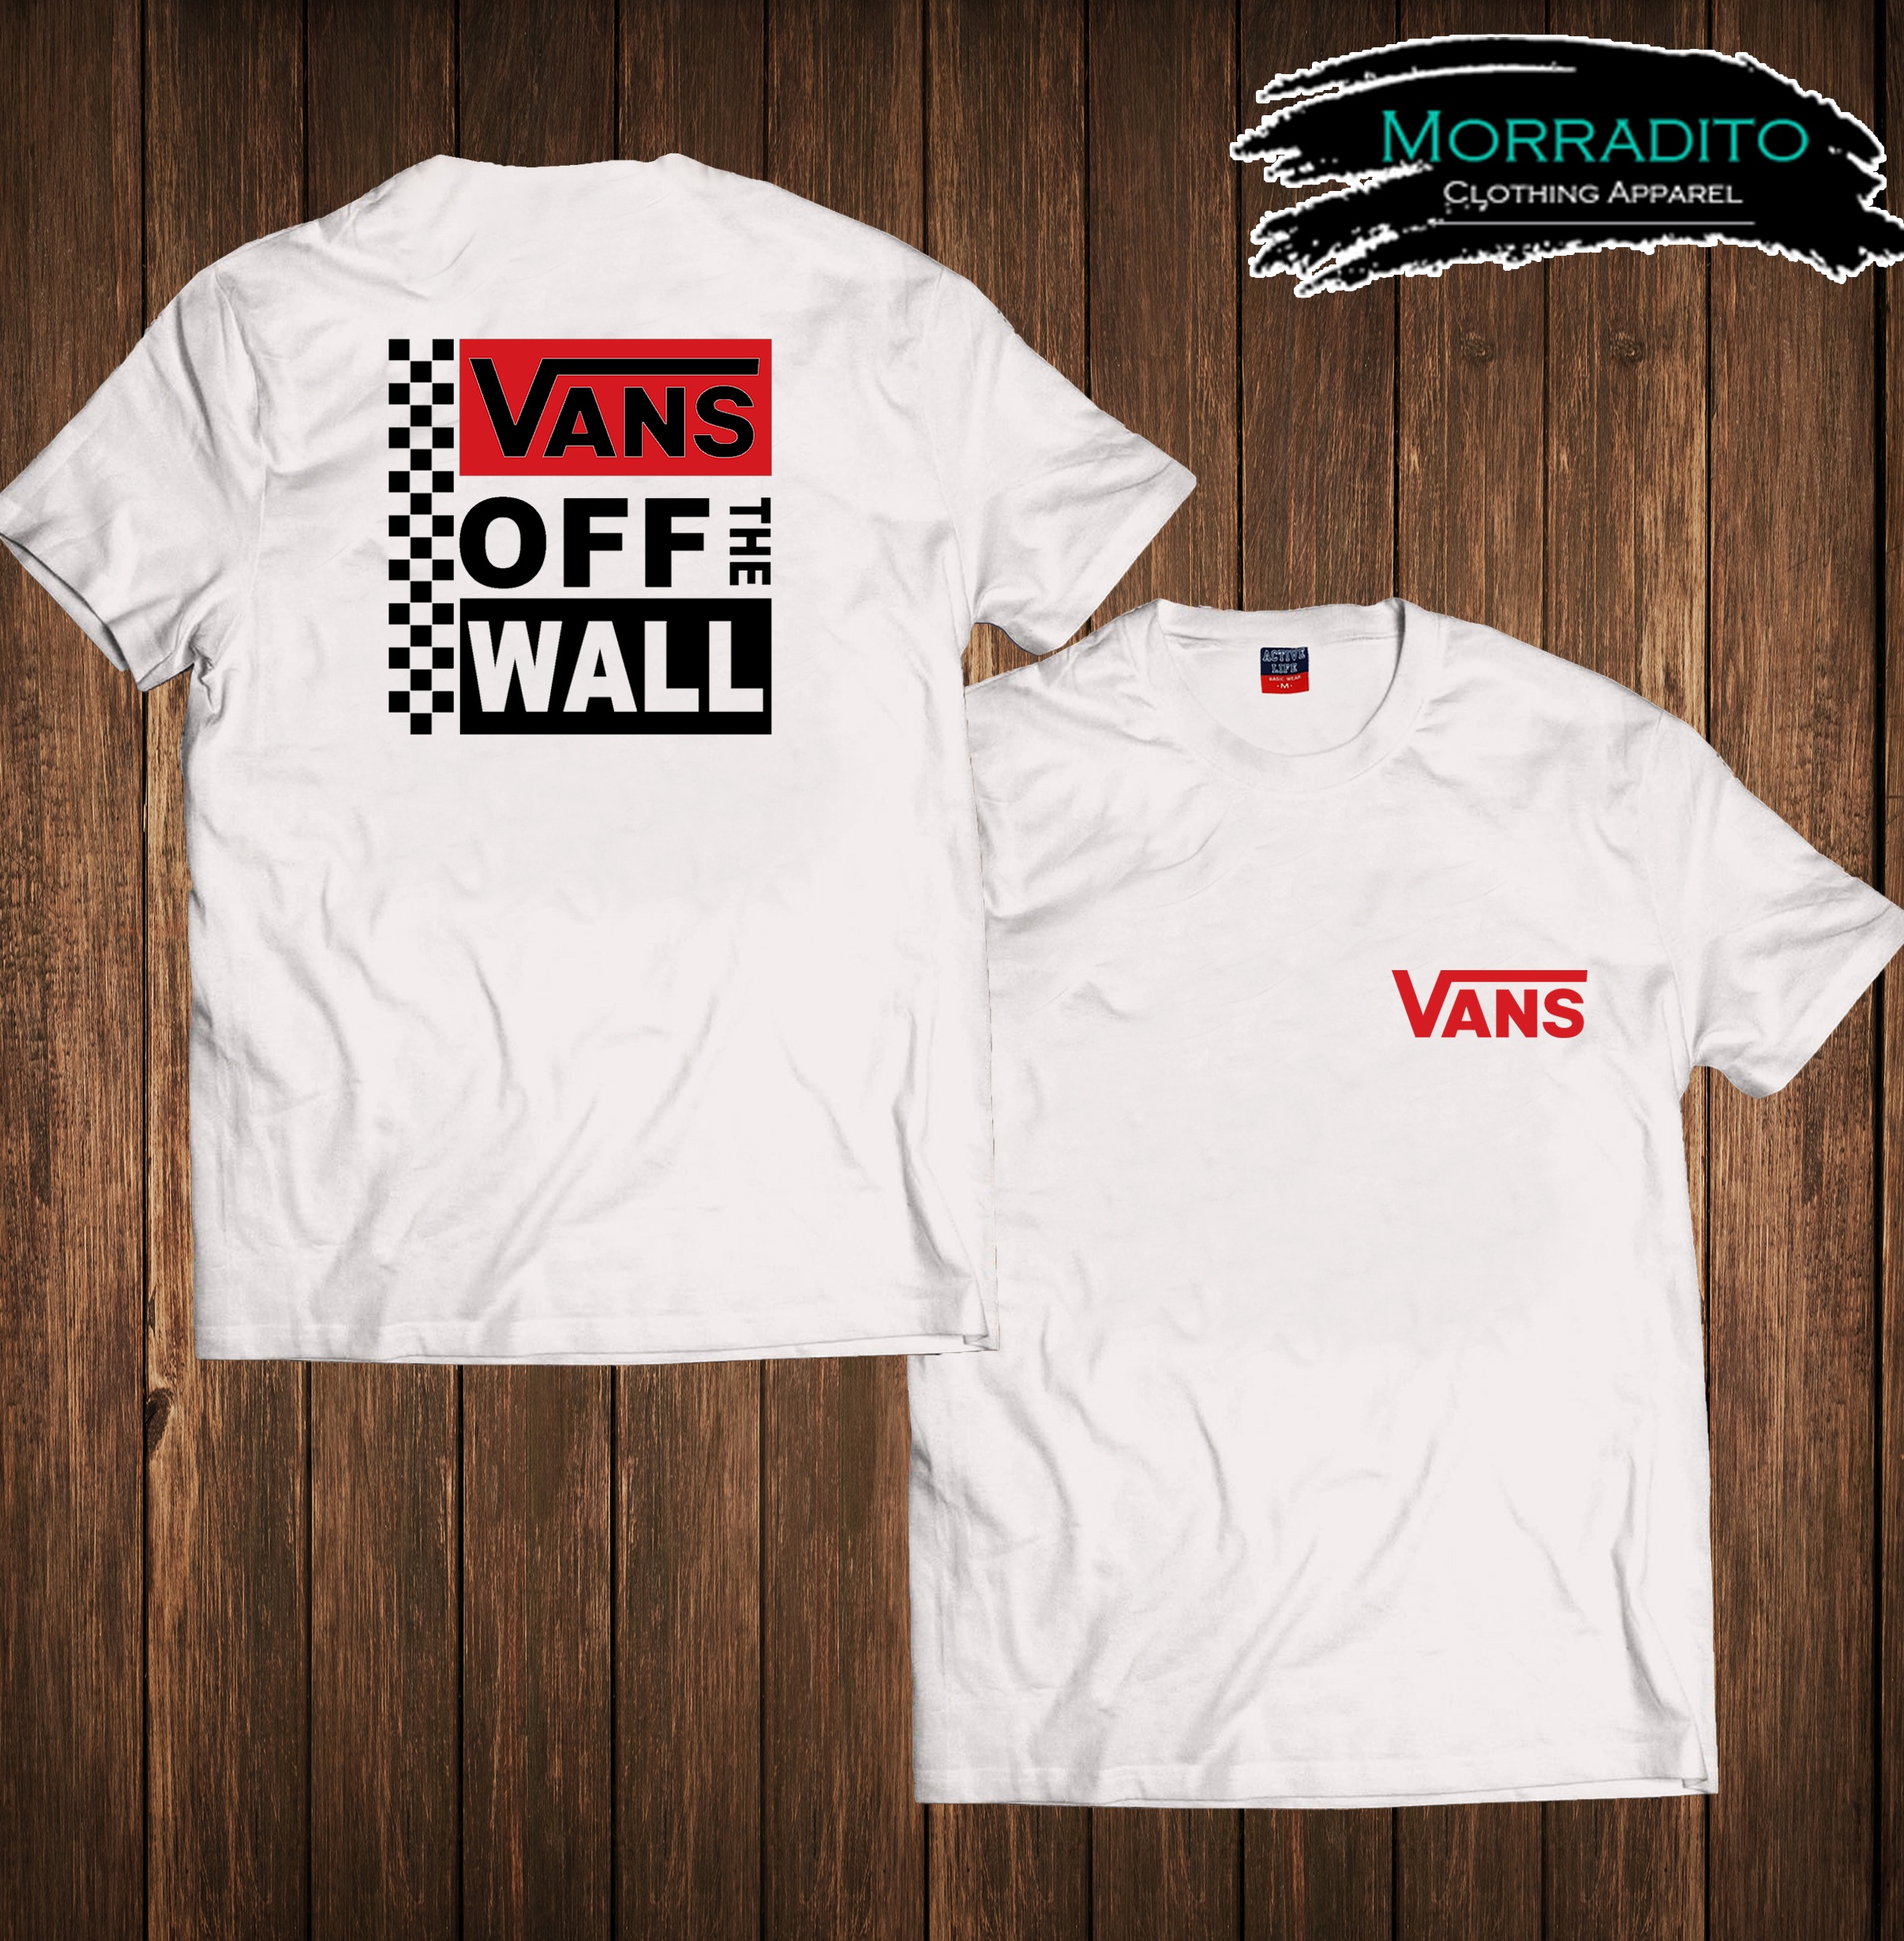 VANS OFF THE WALL SHIRT 2020: Buy sell 